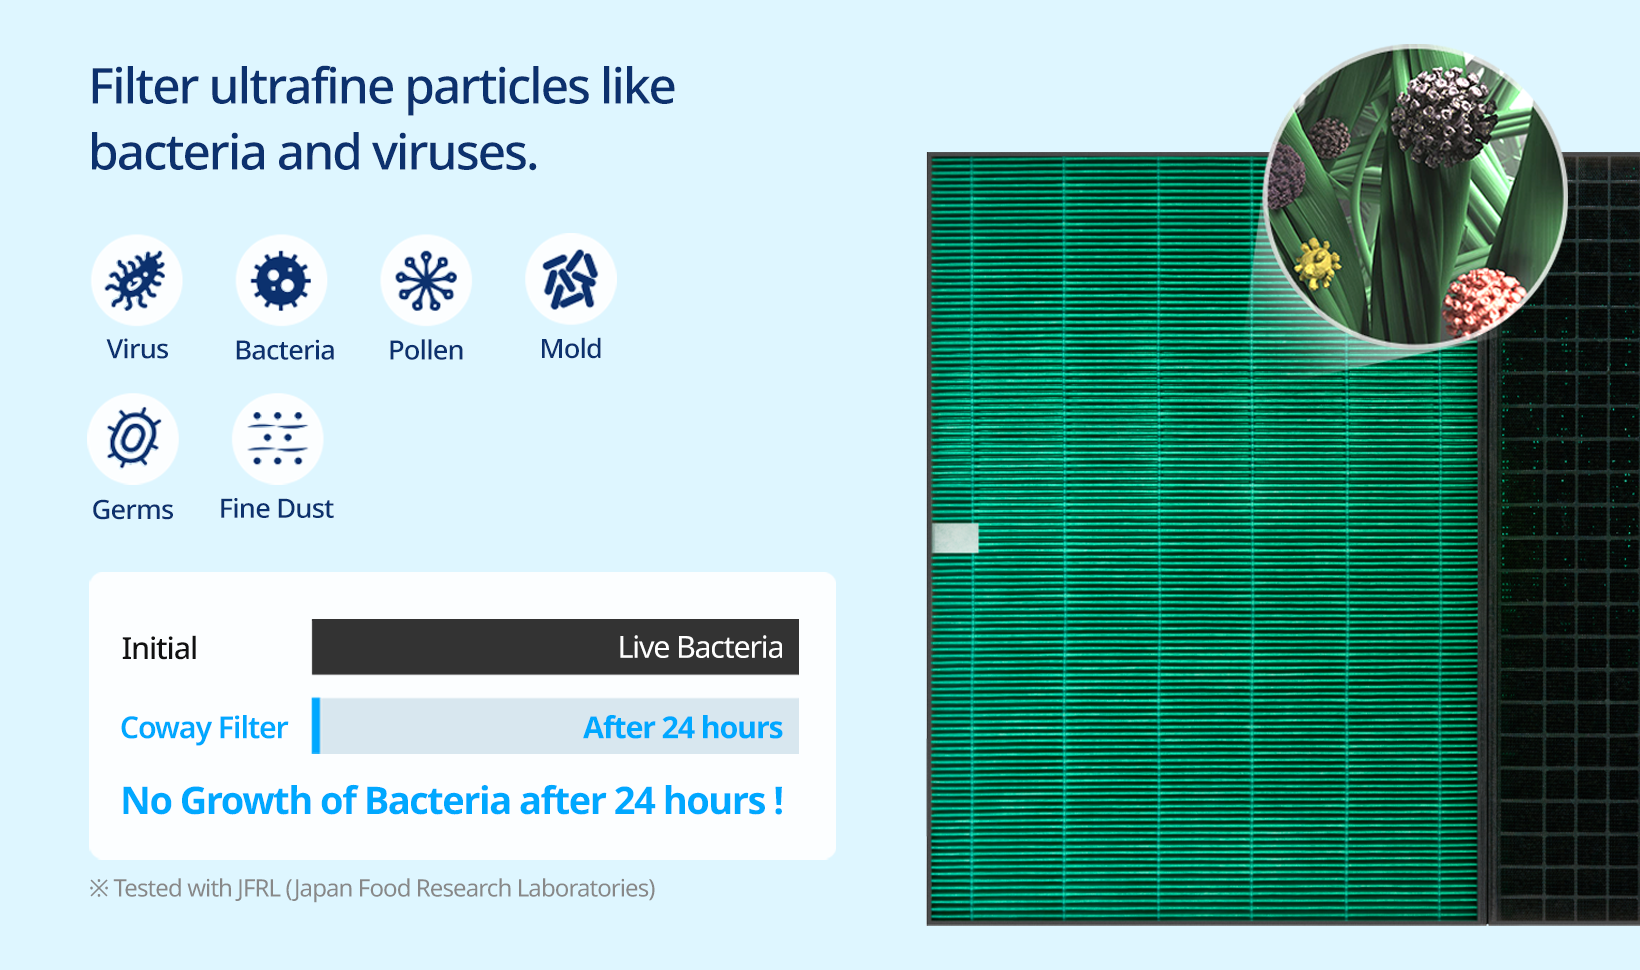 Filter ultrafine particles like bacteria and viruses: No Growth of Bacteria after 24 hours!